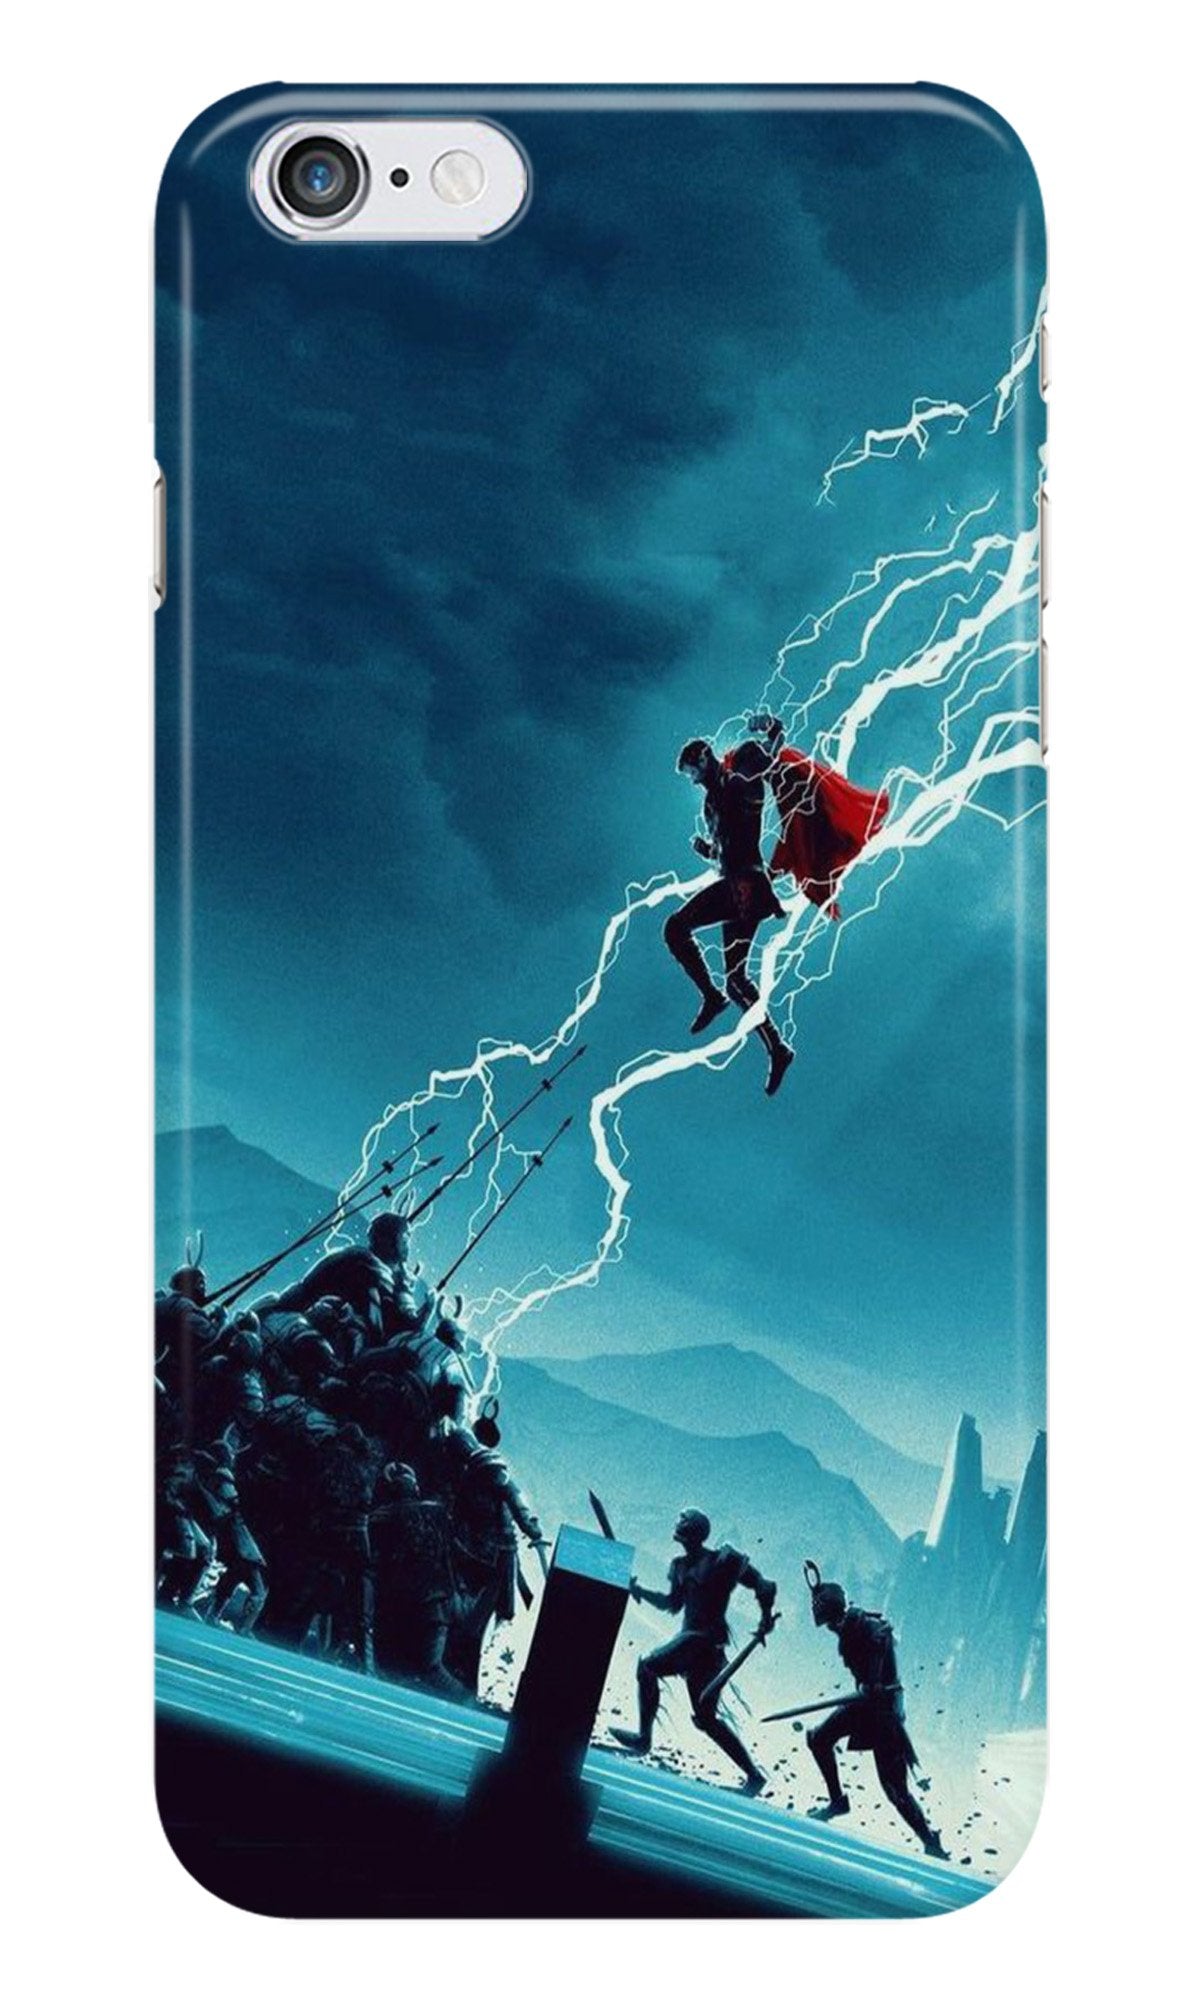 Thor Avengers Case for Iphone 6/6S (Design No. 243)